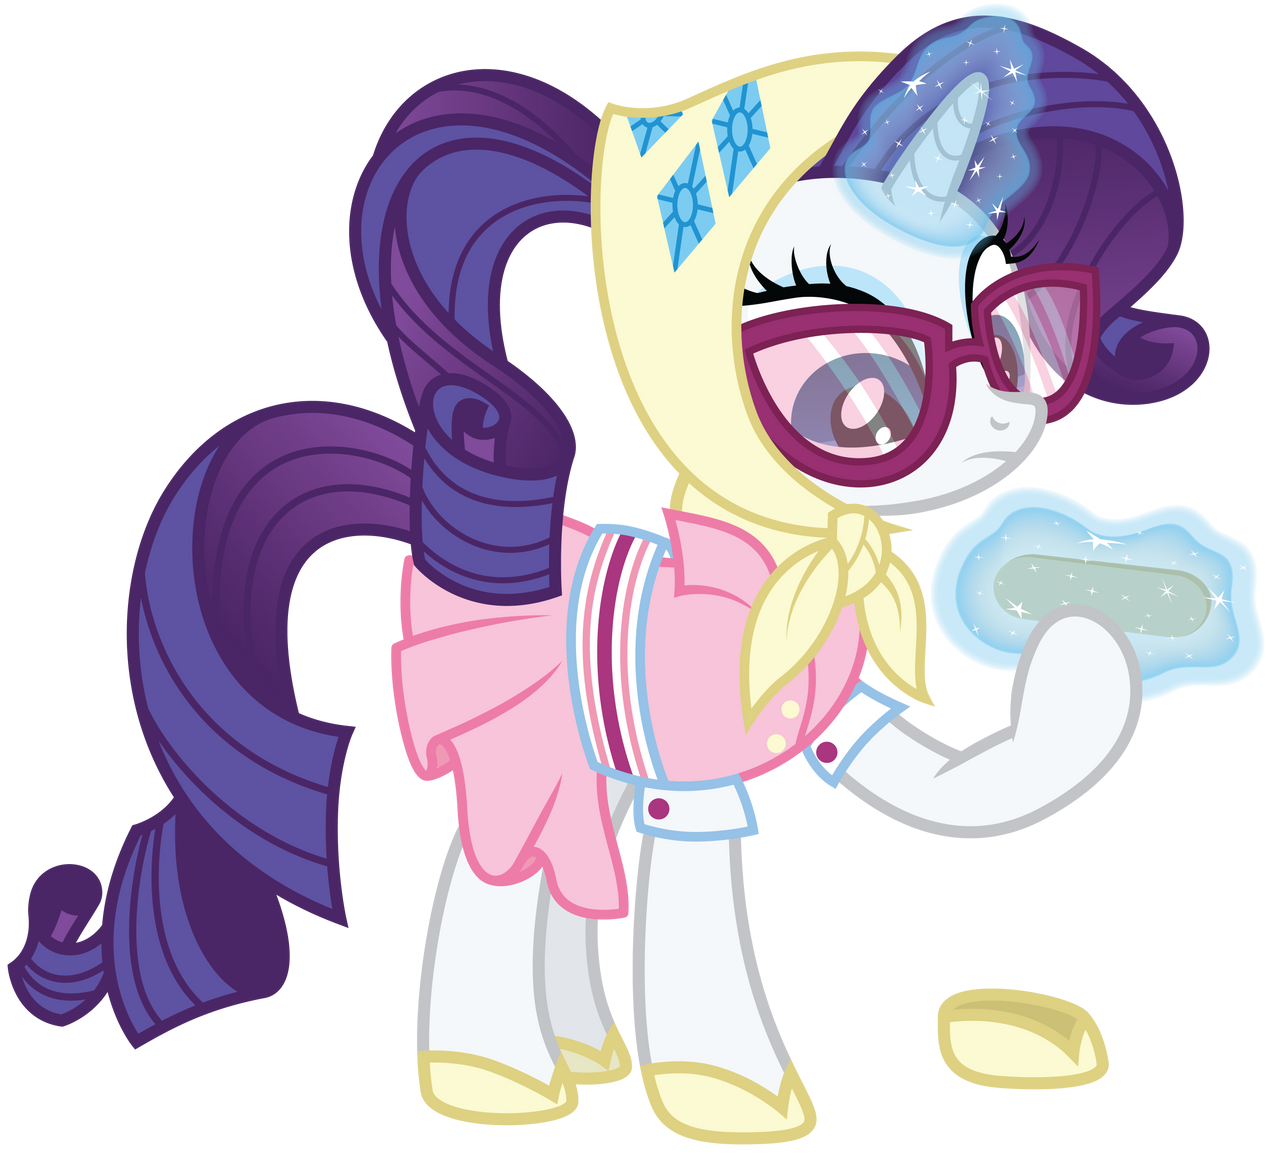 rarity__s_camping_outfit_by_midnight__blitz-d5nm4xi.png